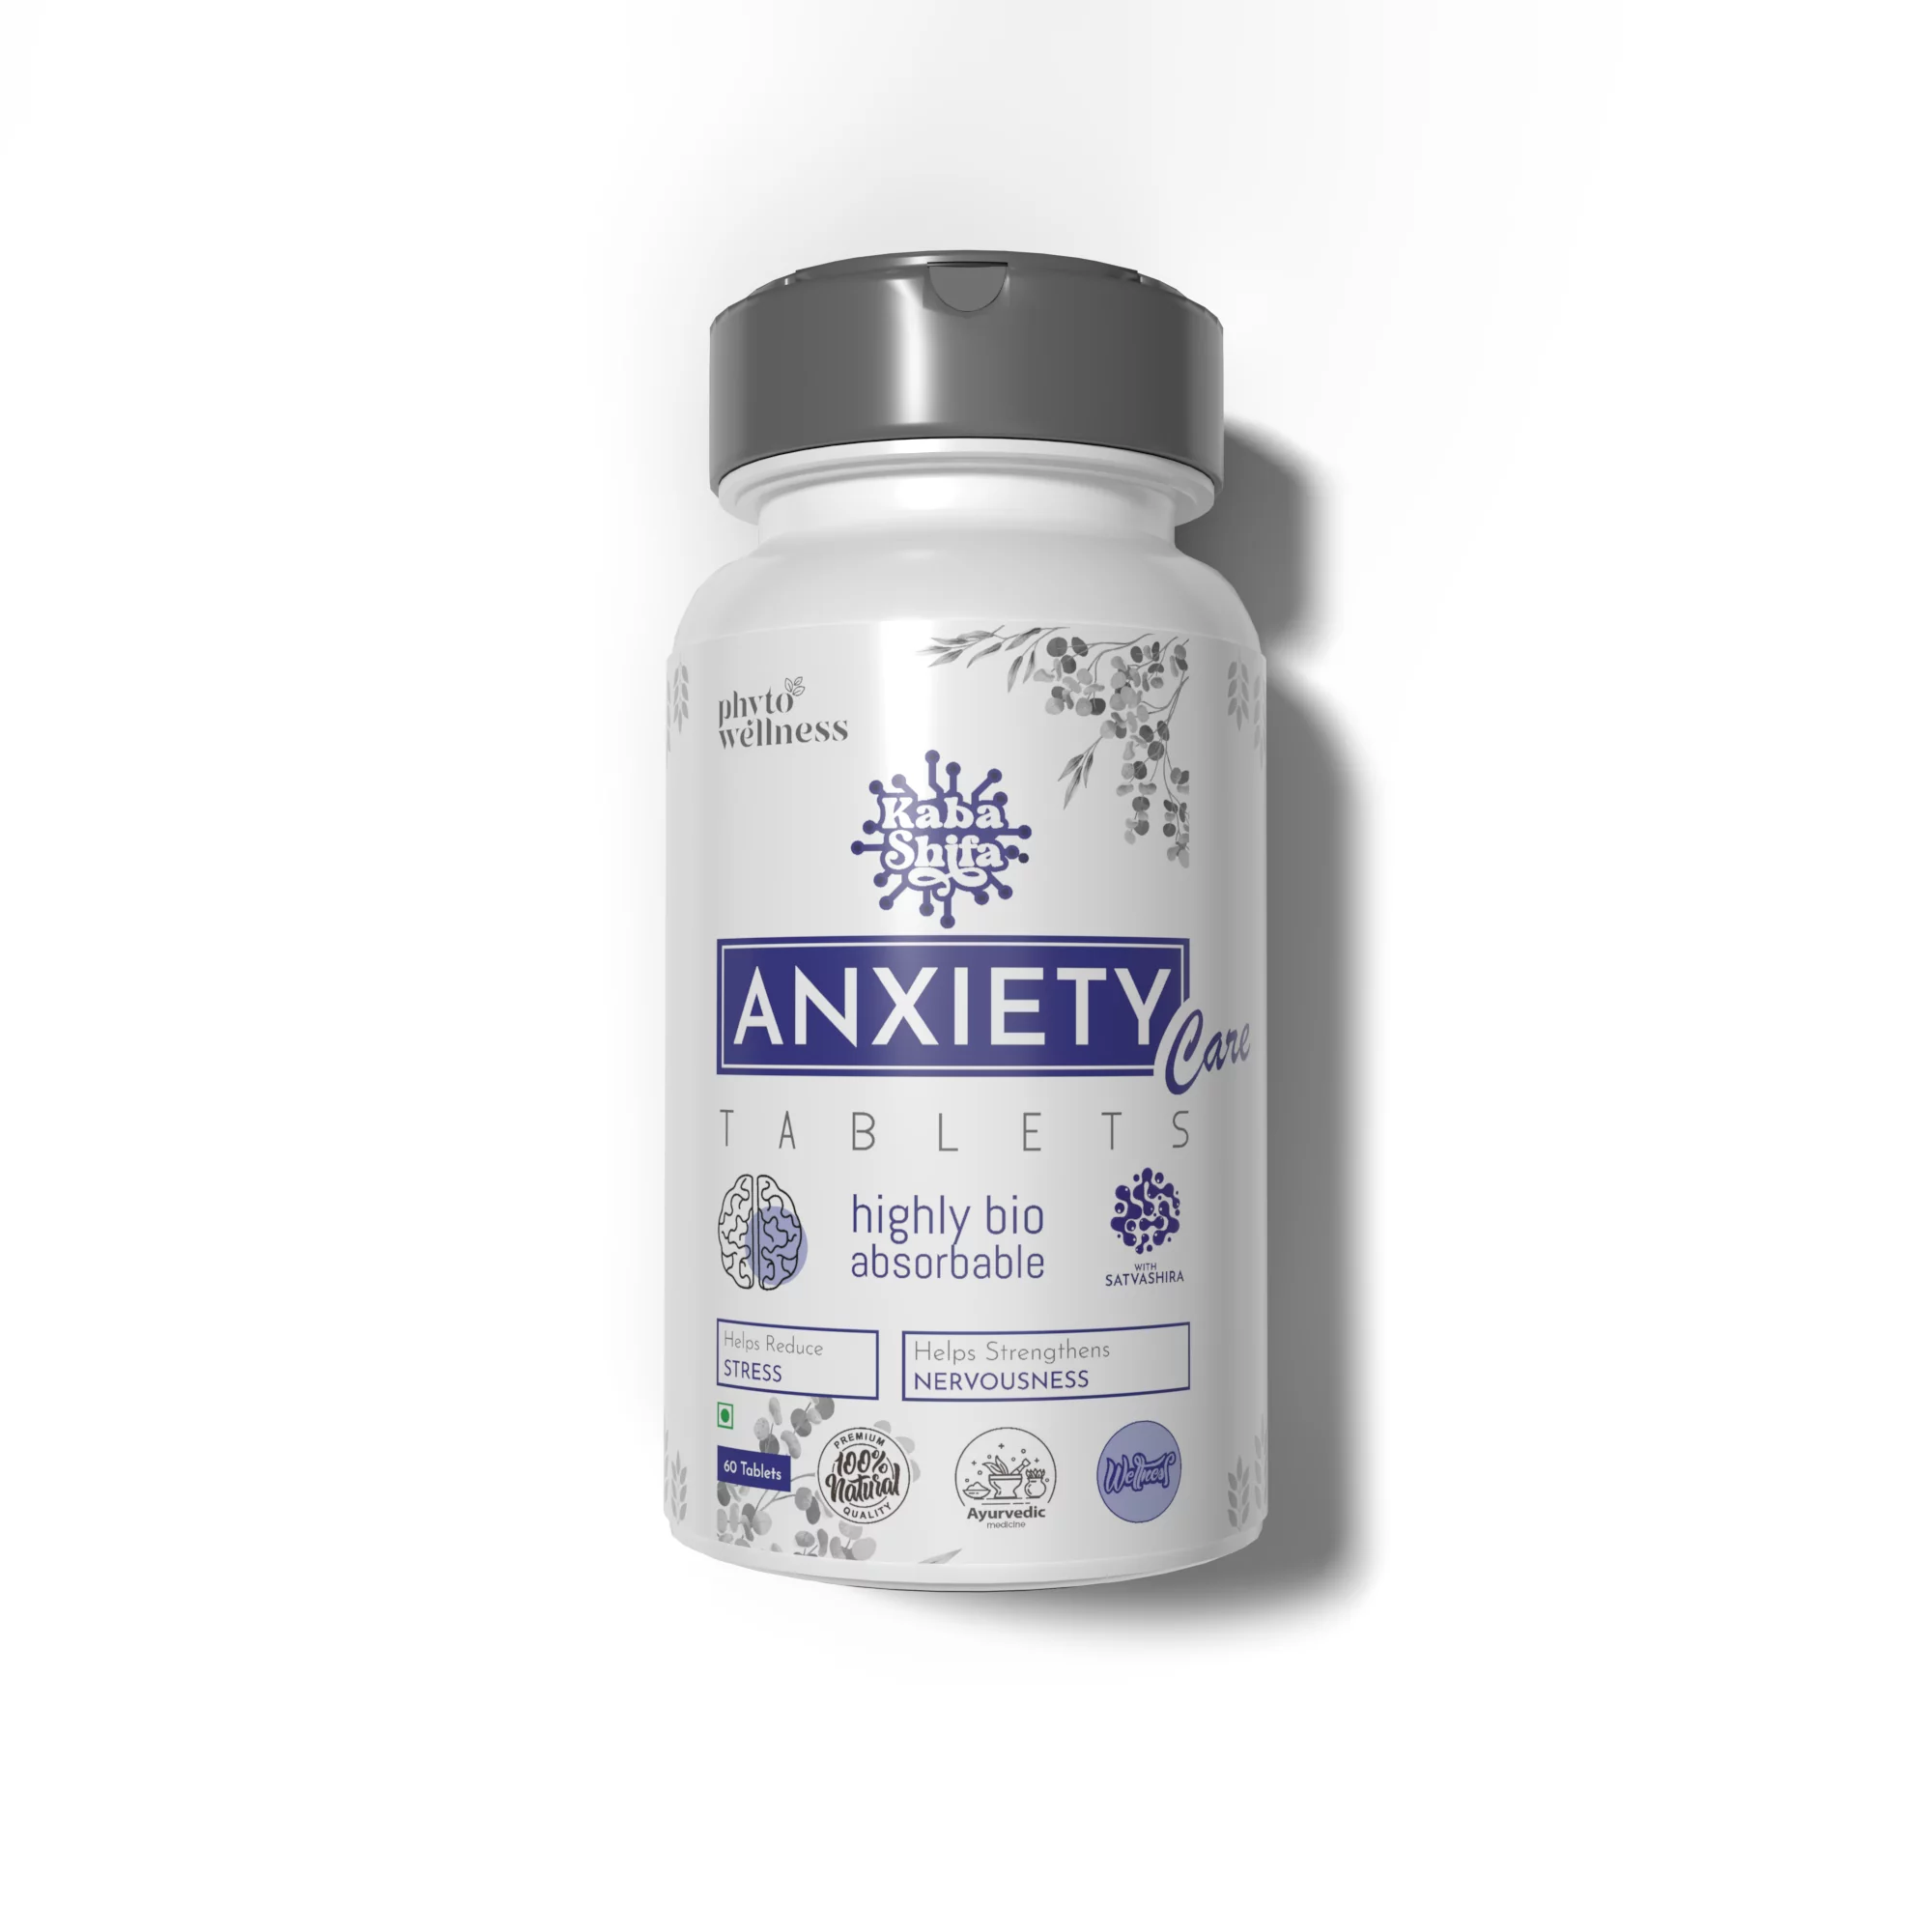 Probiotic Anxiety Care 60 Tablets